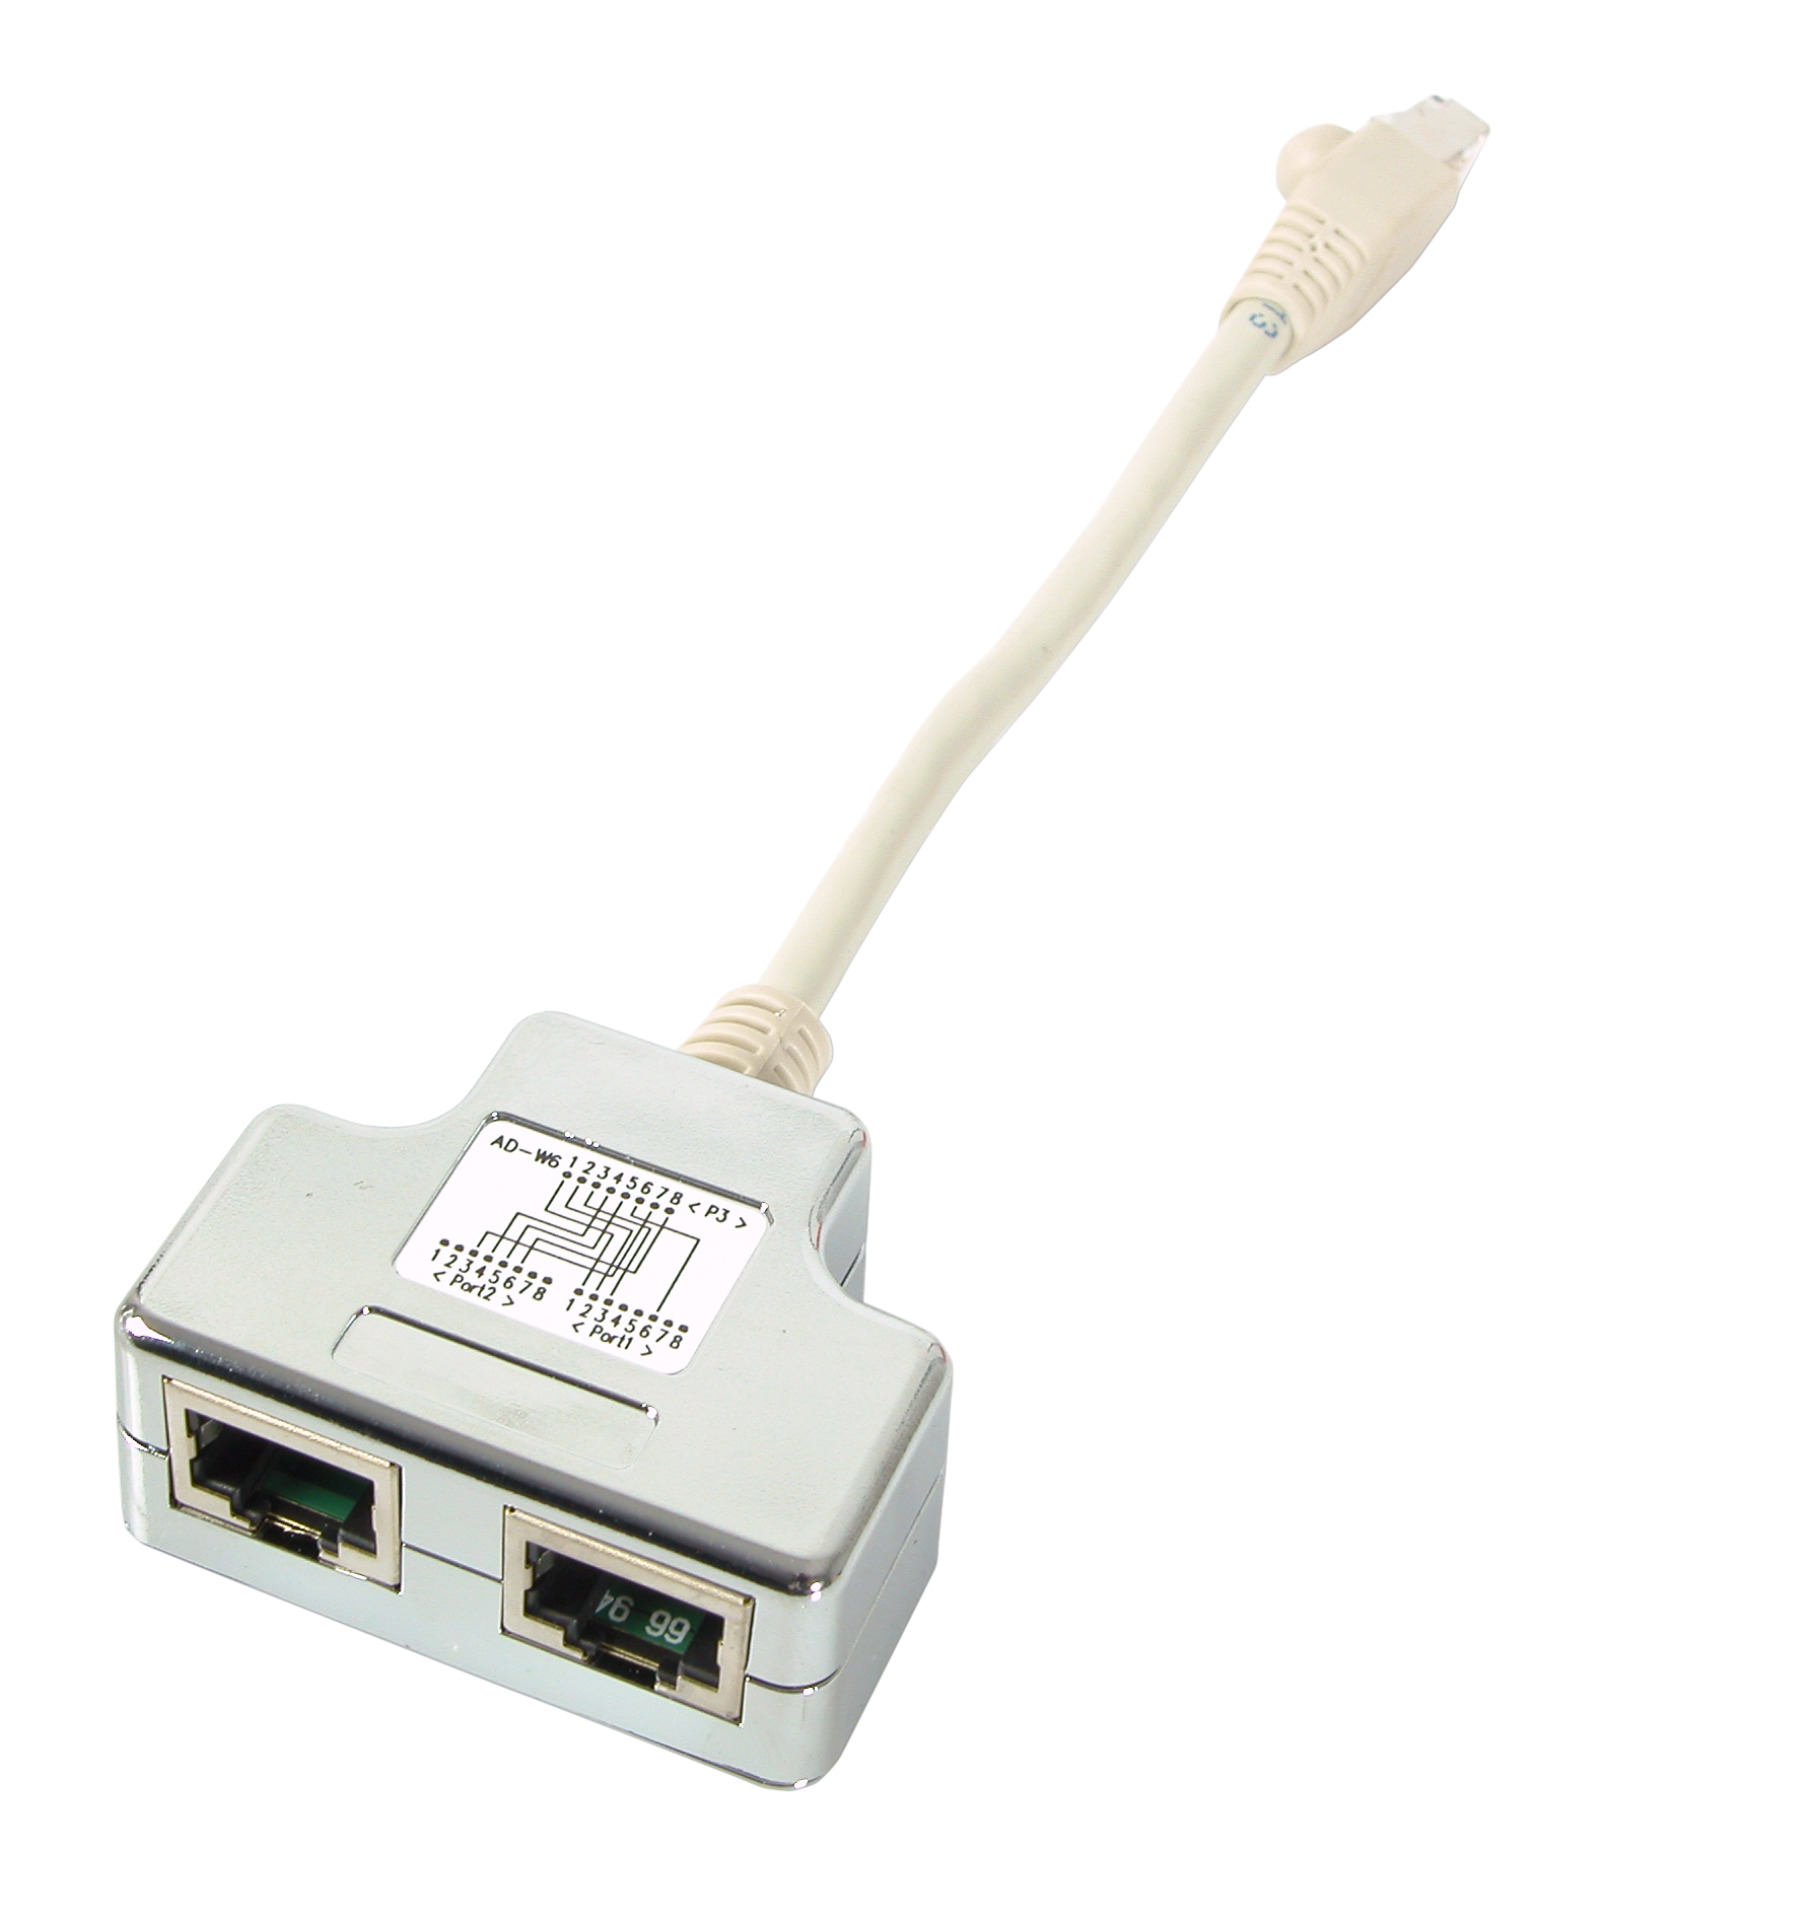 T-Adapter Cat.5e 2 x 10/100BaseT for Cable Sharing